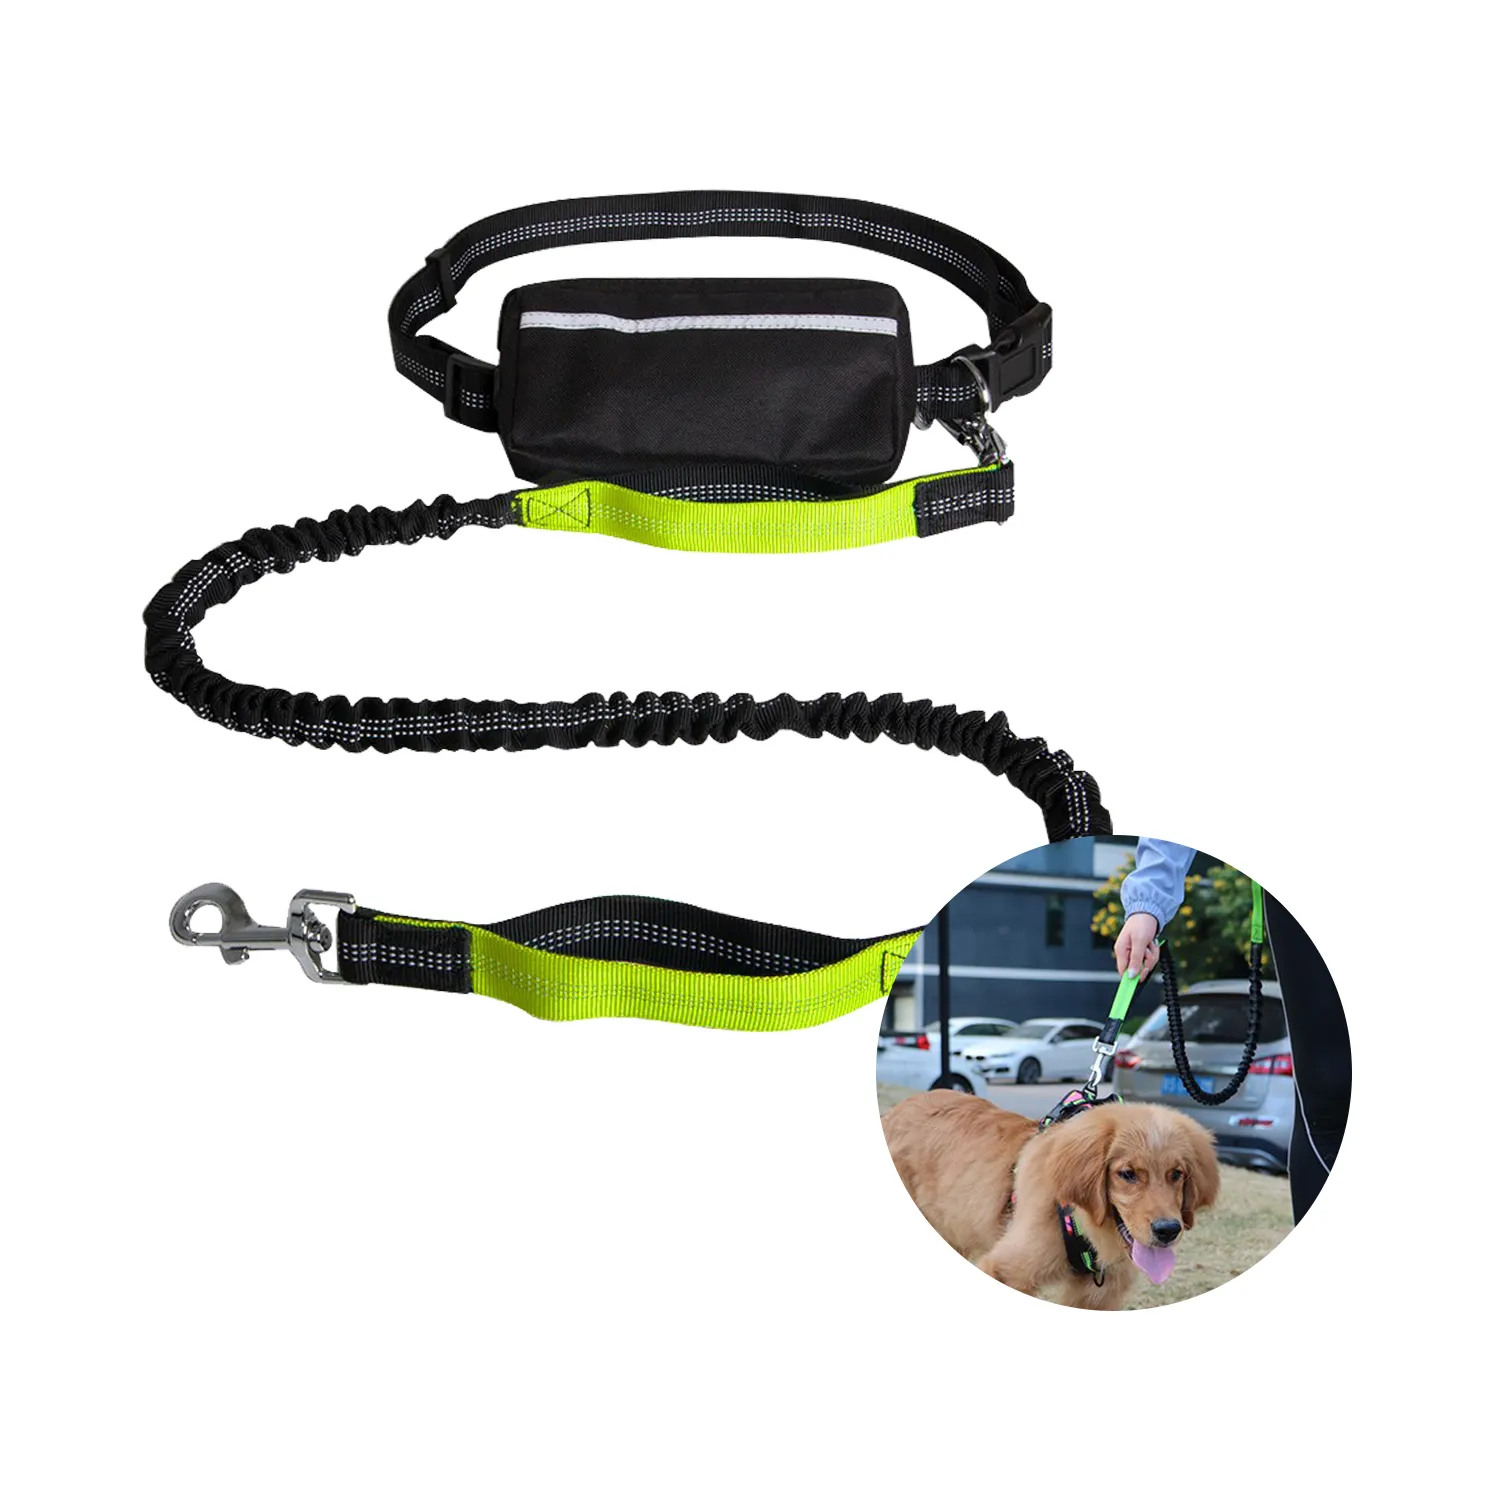 Padded Handle for Running PETDOM Hands Free Dog Leash Camo Jogging 6 ft Dual Bungee Leash for Large Dogs Up to 200 lb Walking Adjustable Waist Belt 